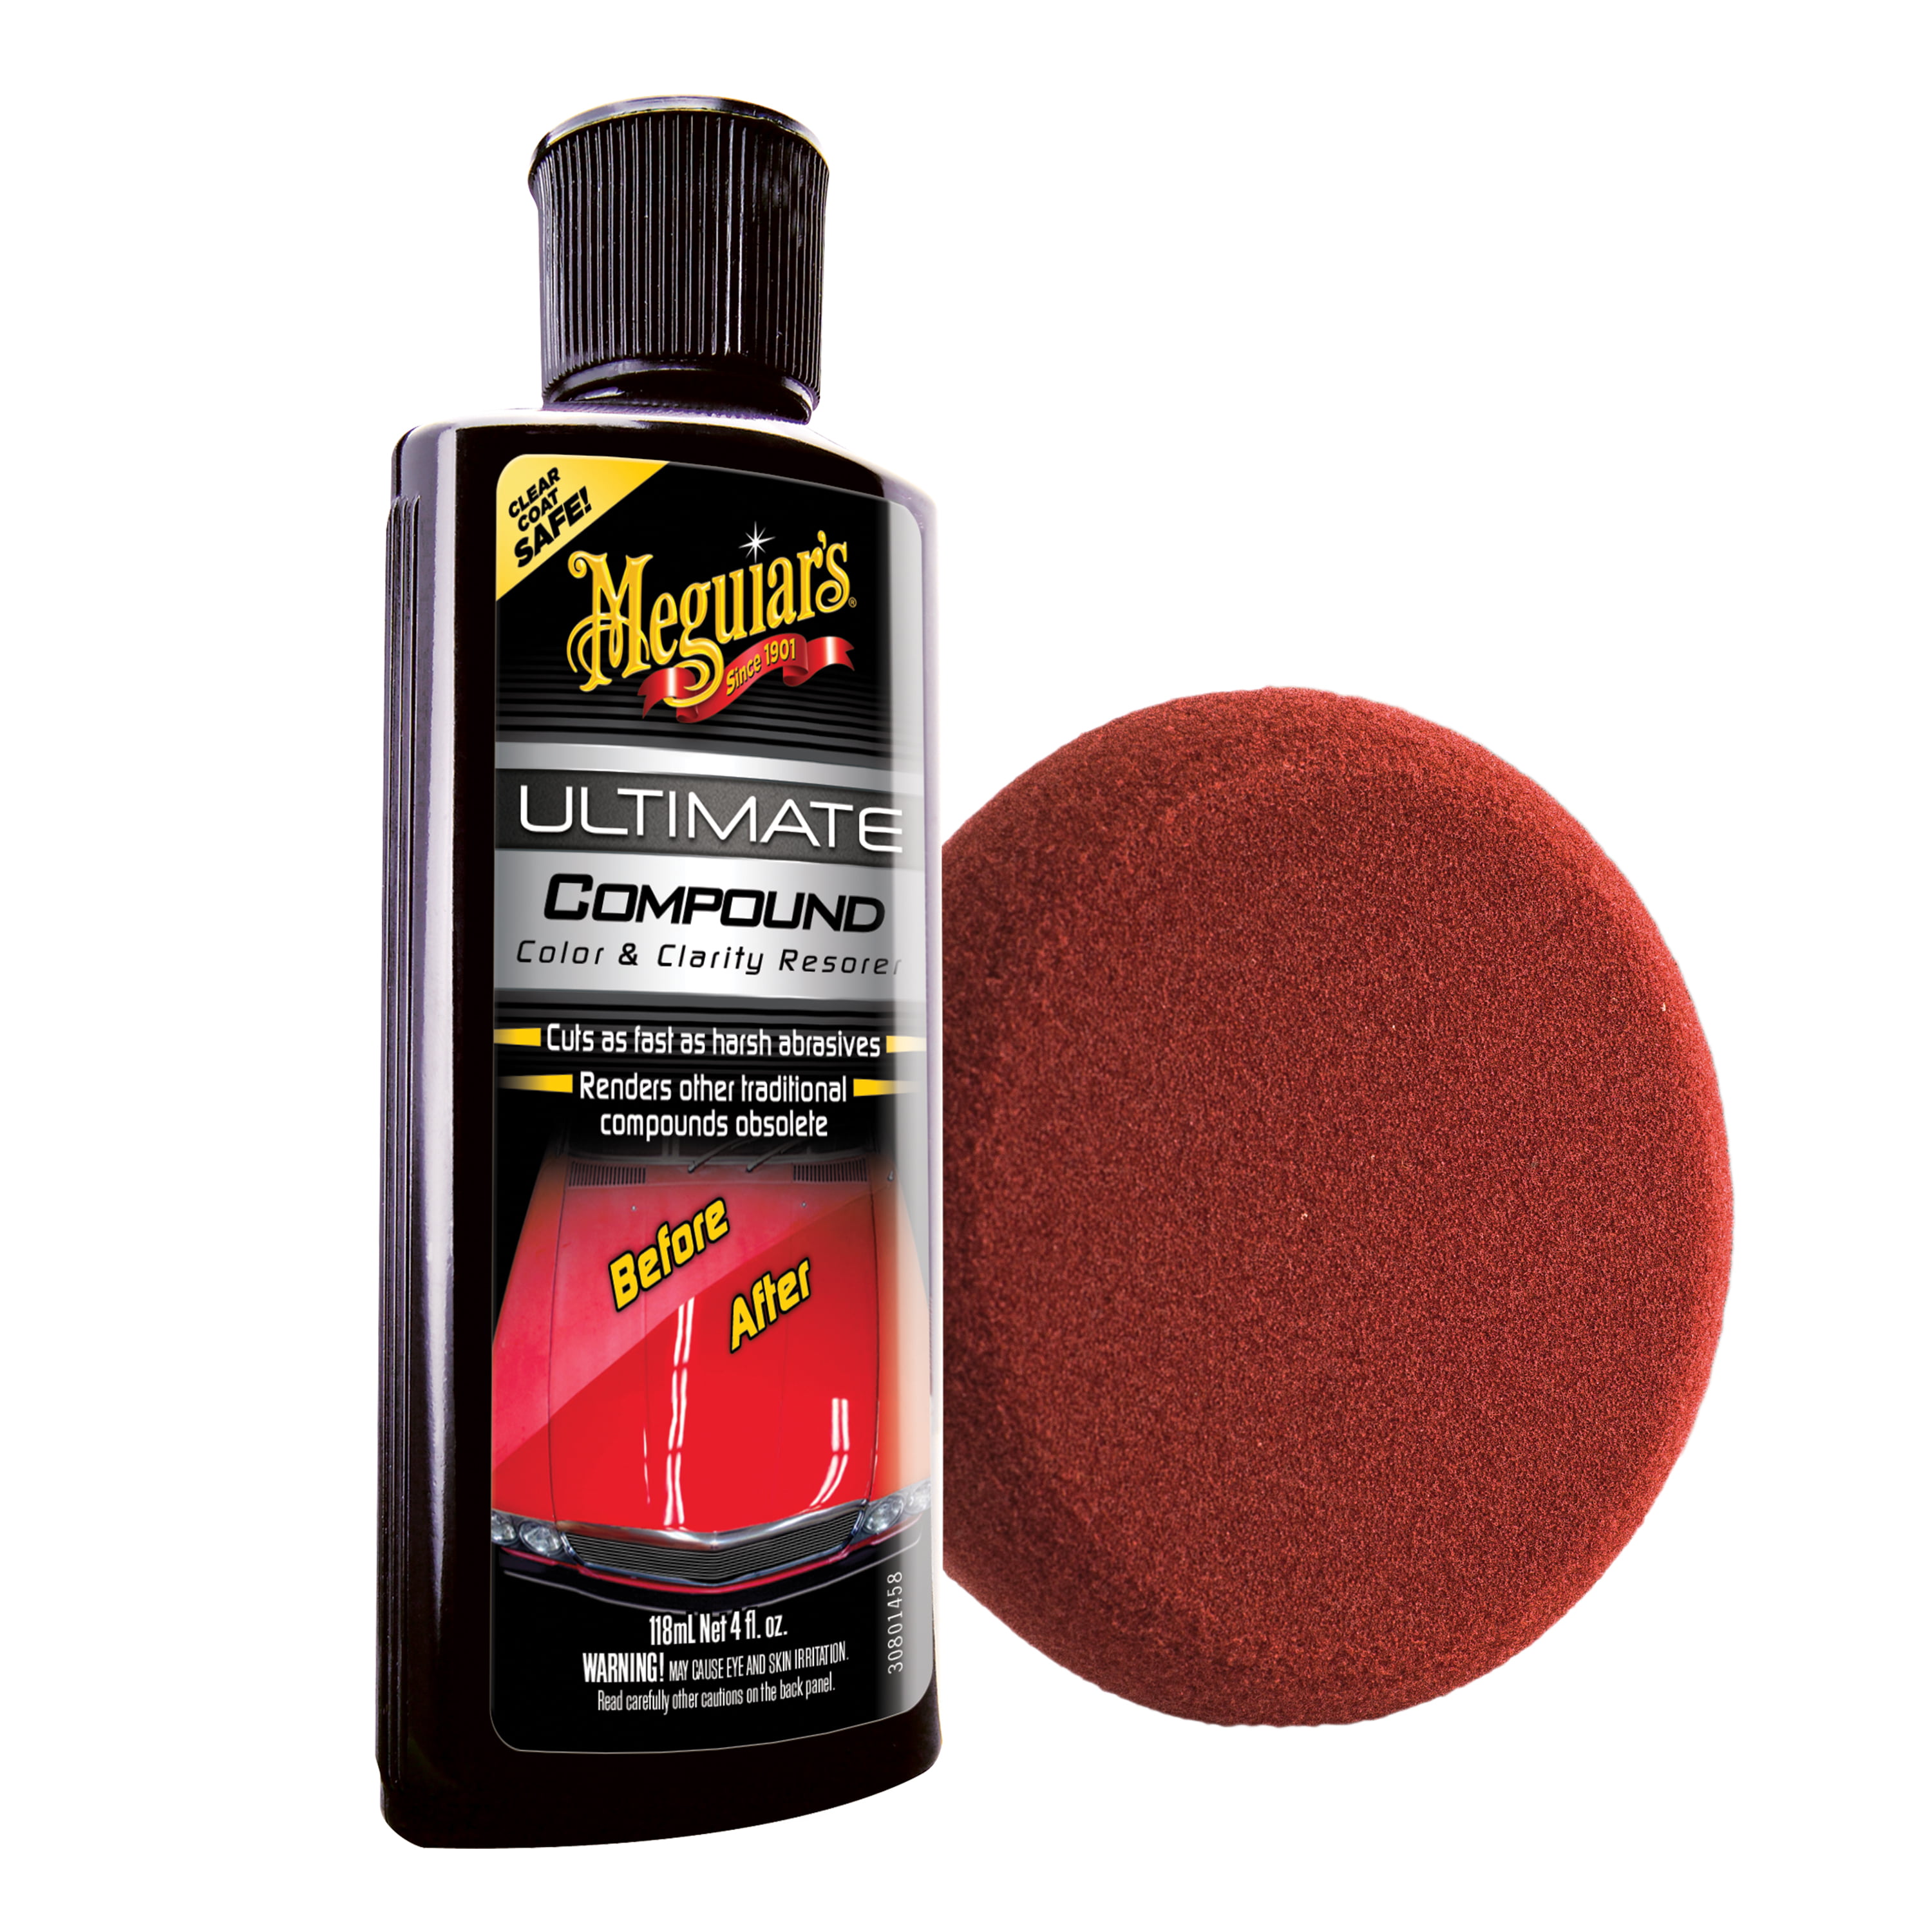 Never underestimate the power of Meguiar's Ultimate Compound and